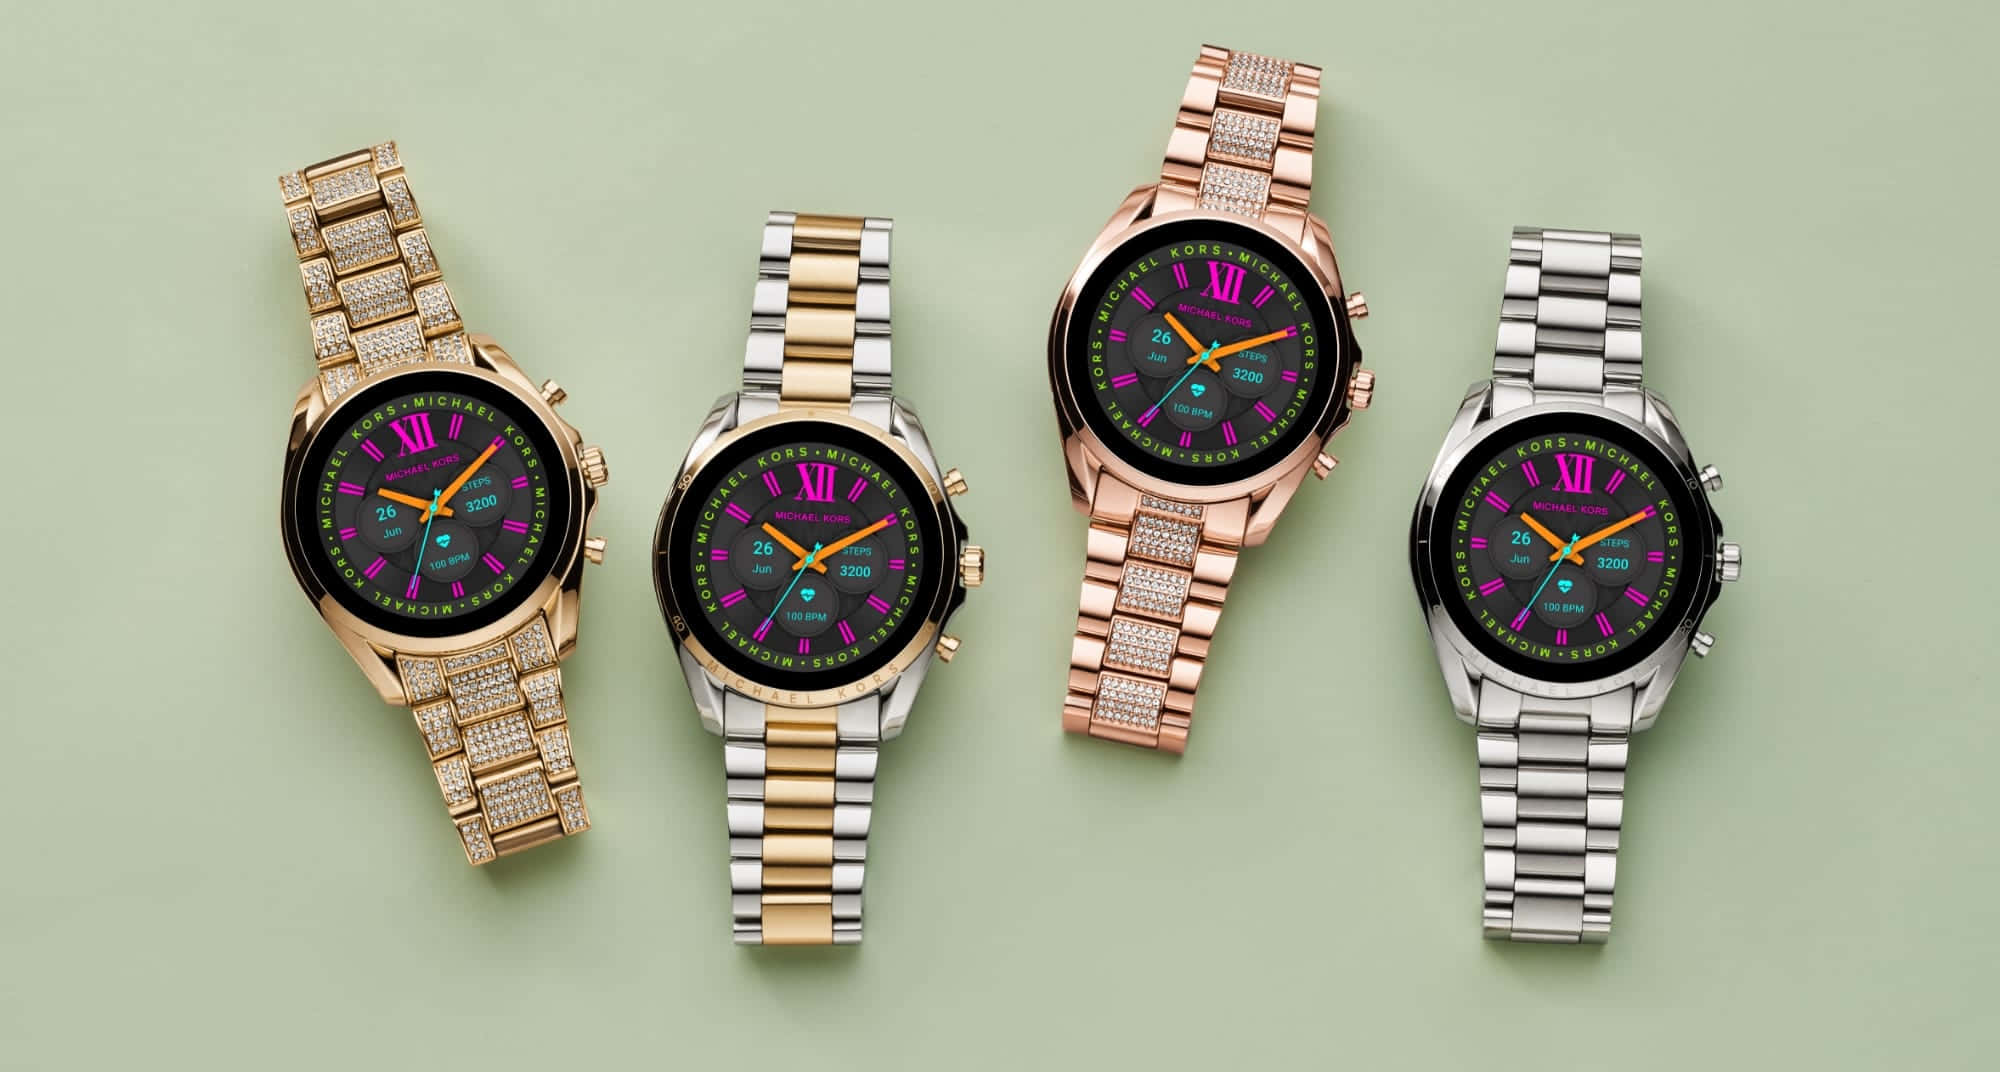 Four Watches With Different Colored Faces